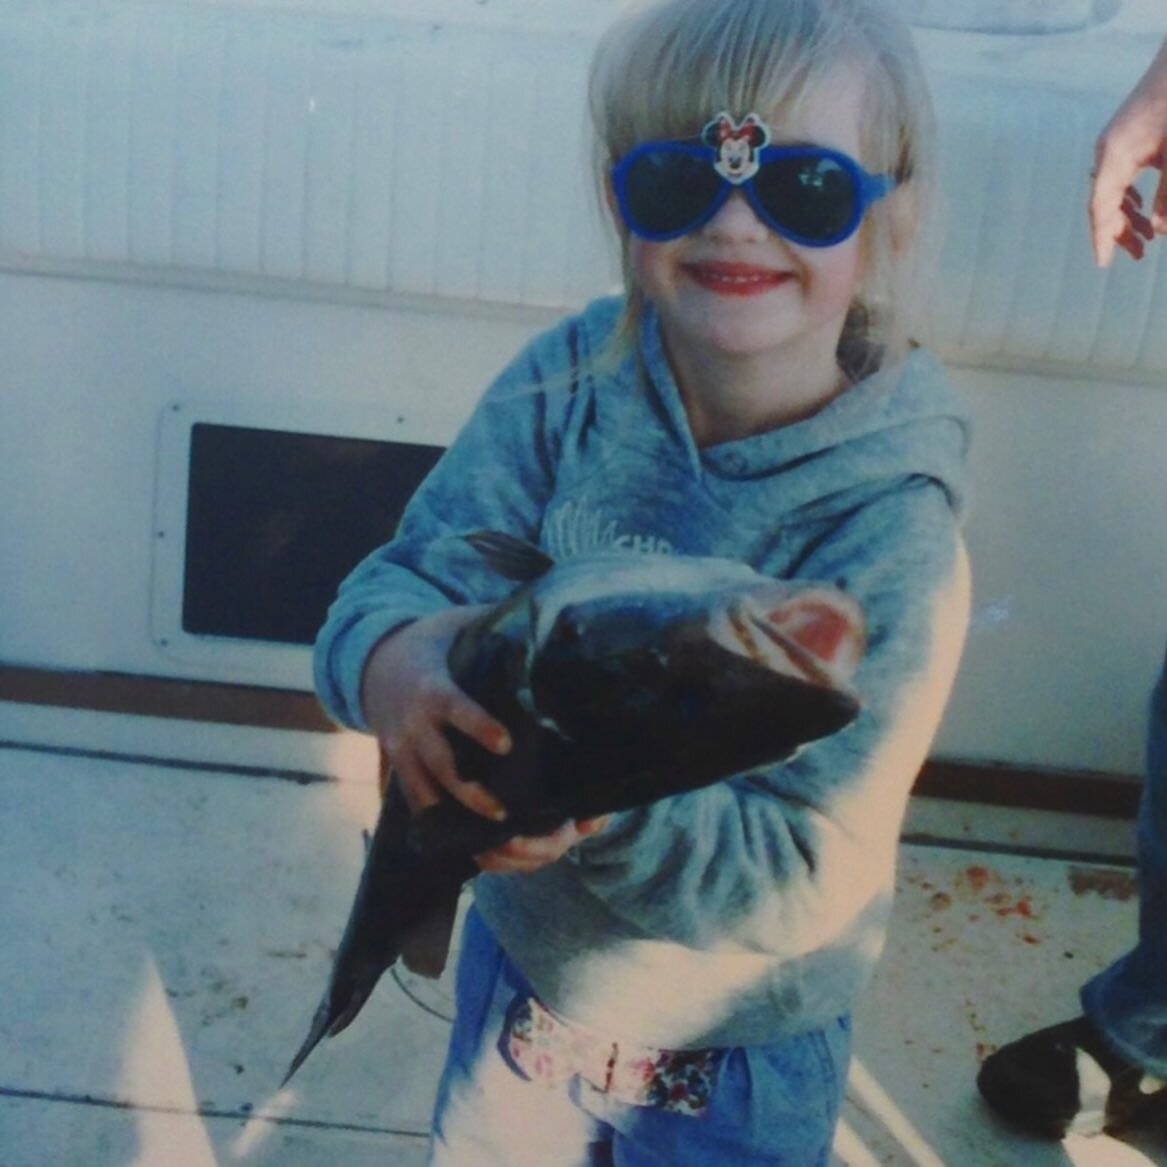 I know we&rsquo;re supposed to be all about growth, but I&rsquo;m just out here trying to be as cool as my younger self 

#throwback #alaskalife #kodiak #fishing #90skid